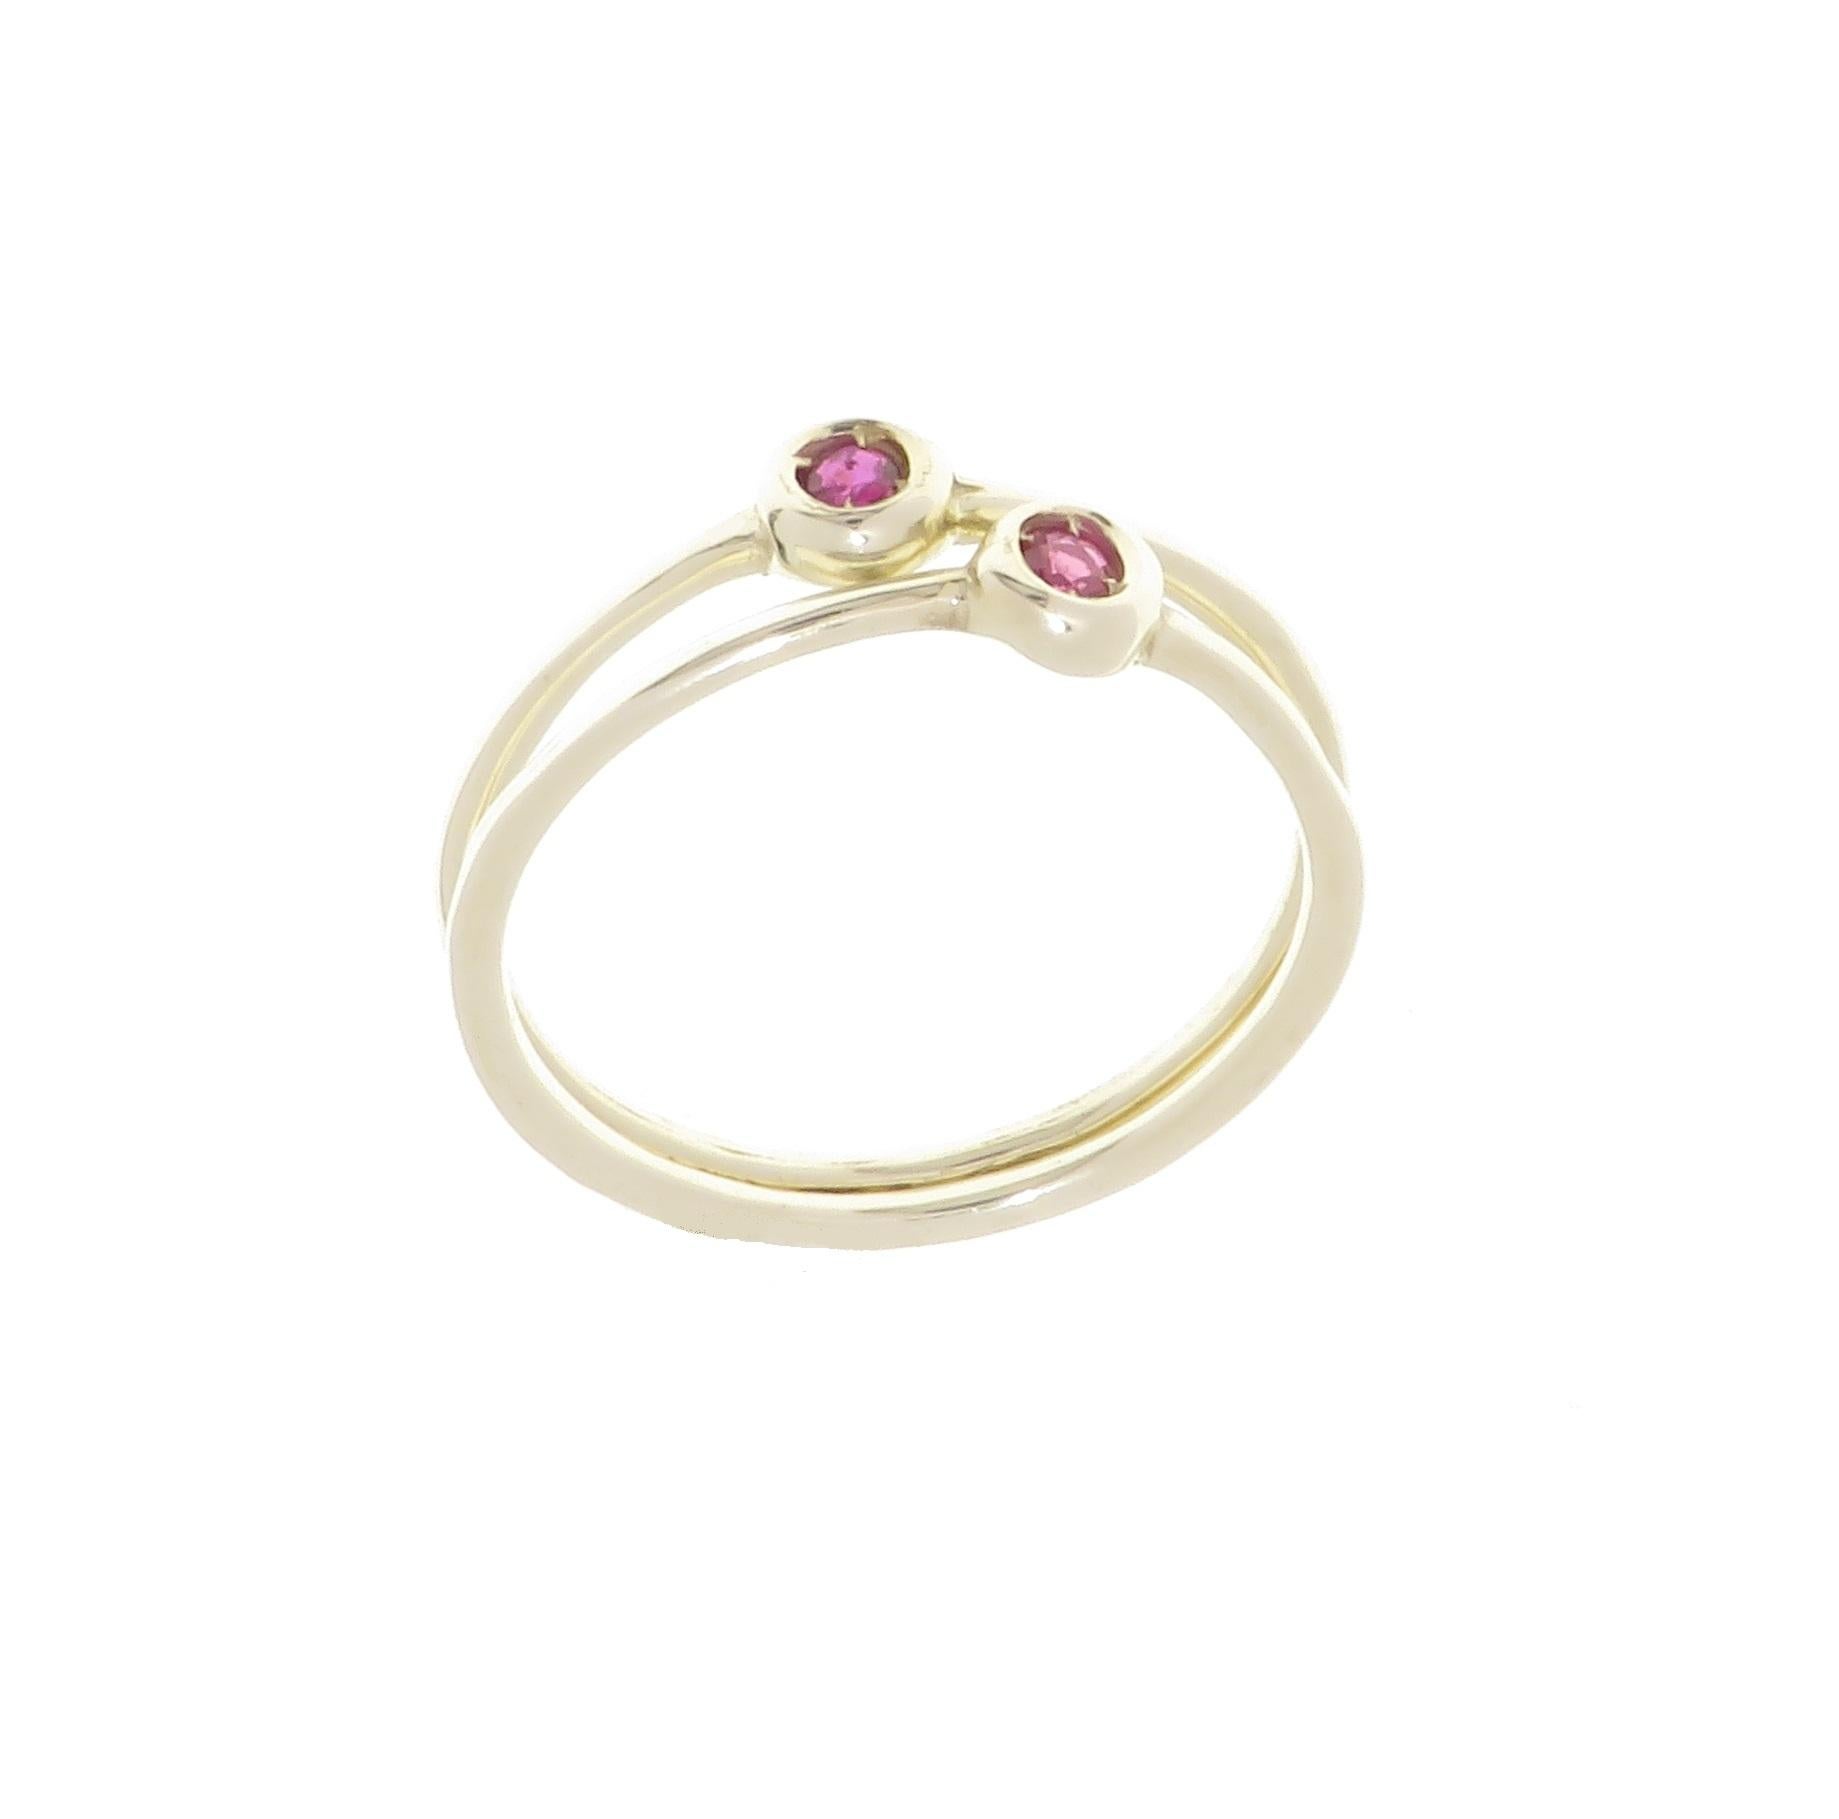 Rubies 9 Karat White Gold Stacking Ring Handcrafted in Italy 6